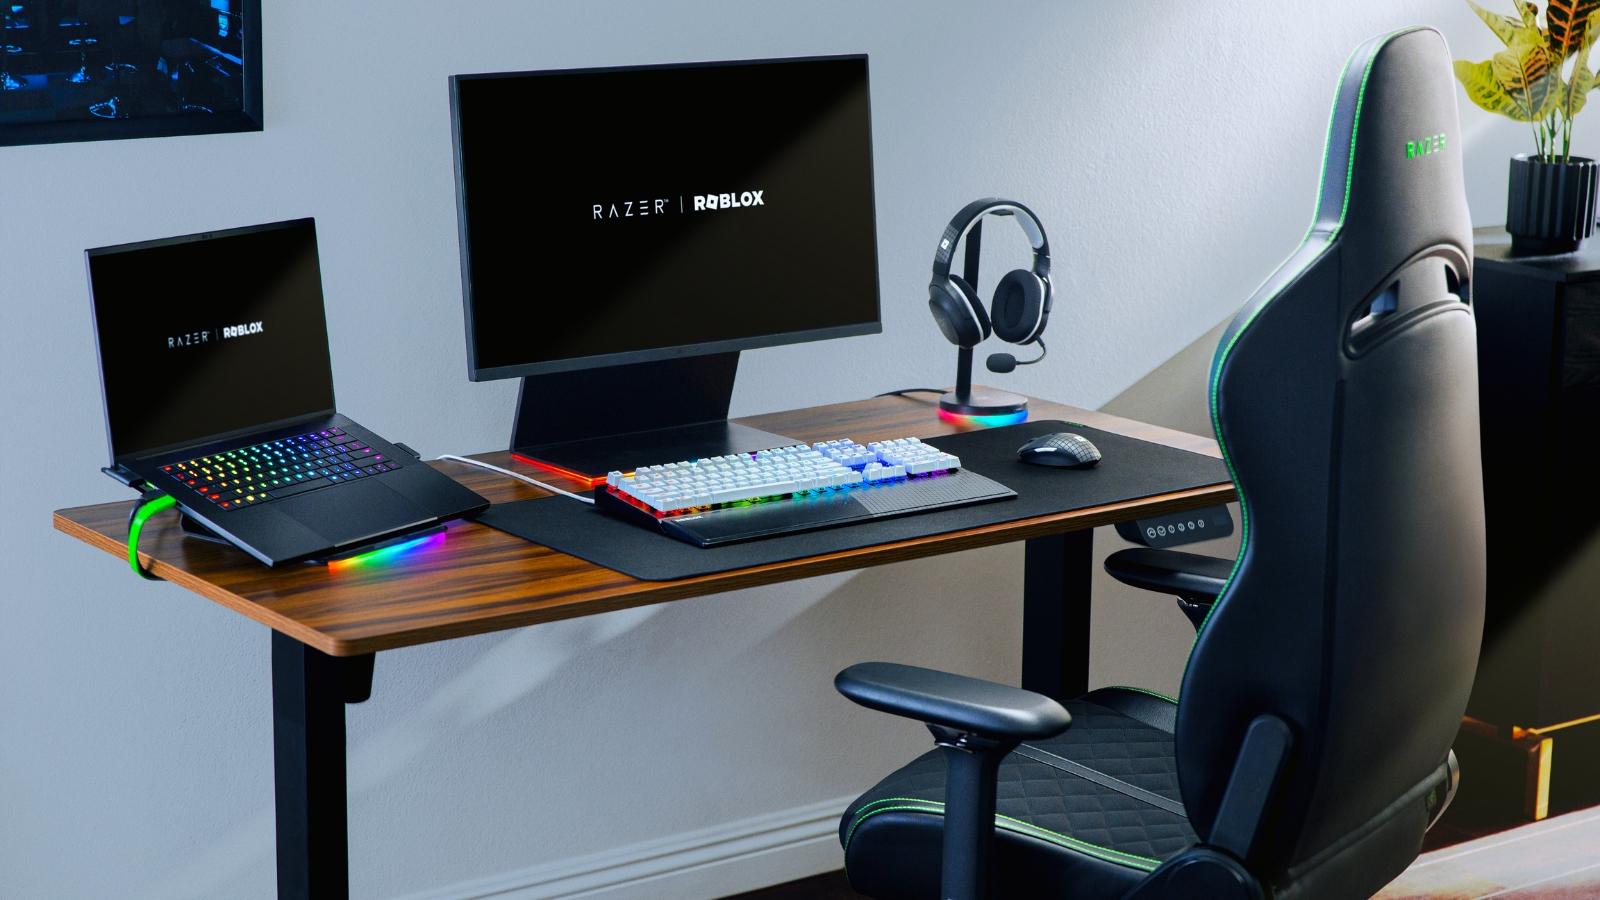 A desktop equipped with Razer Products